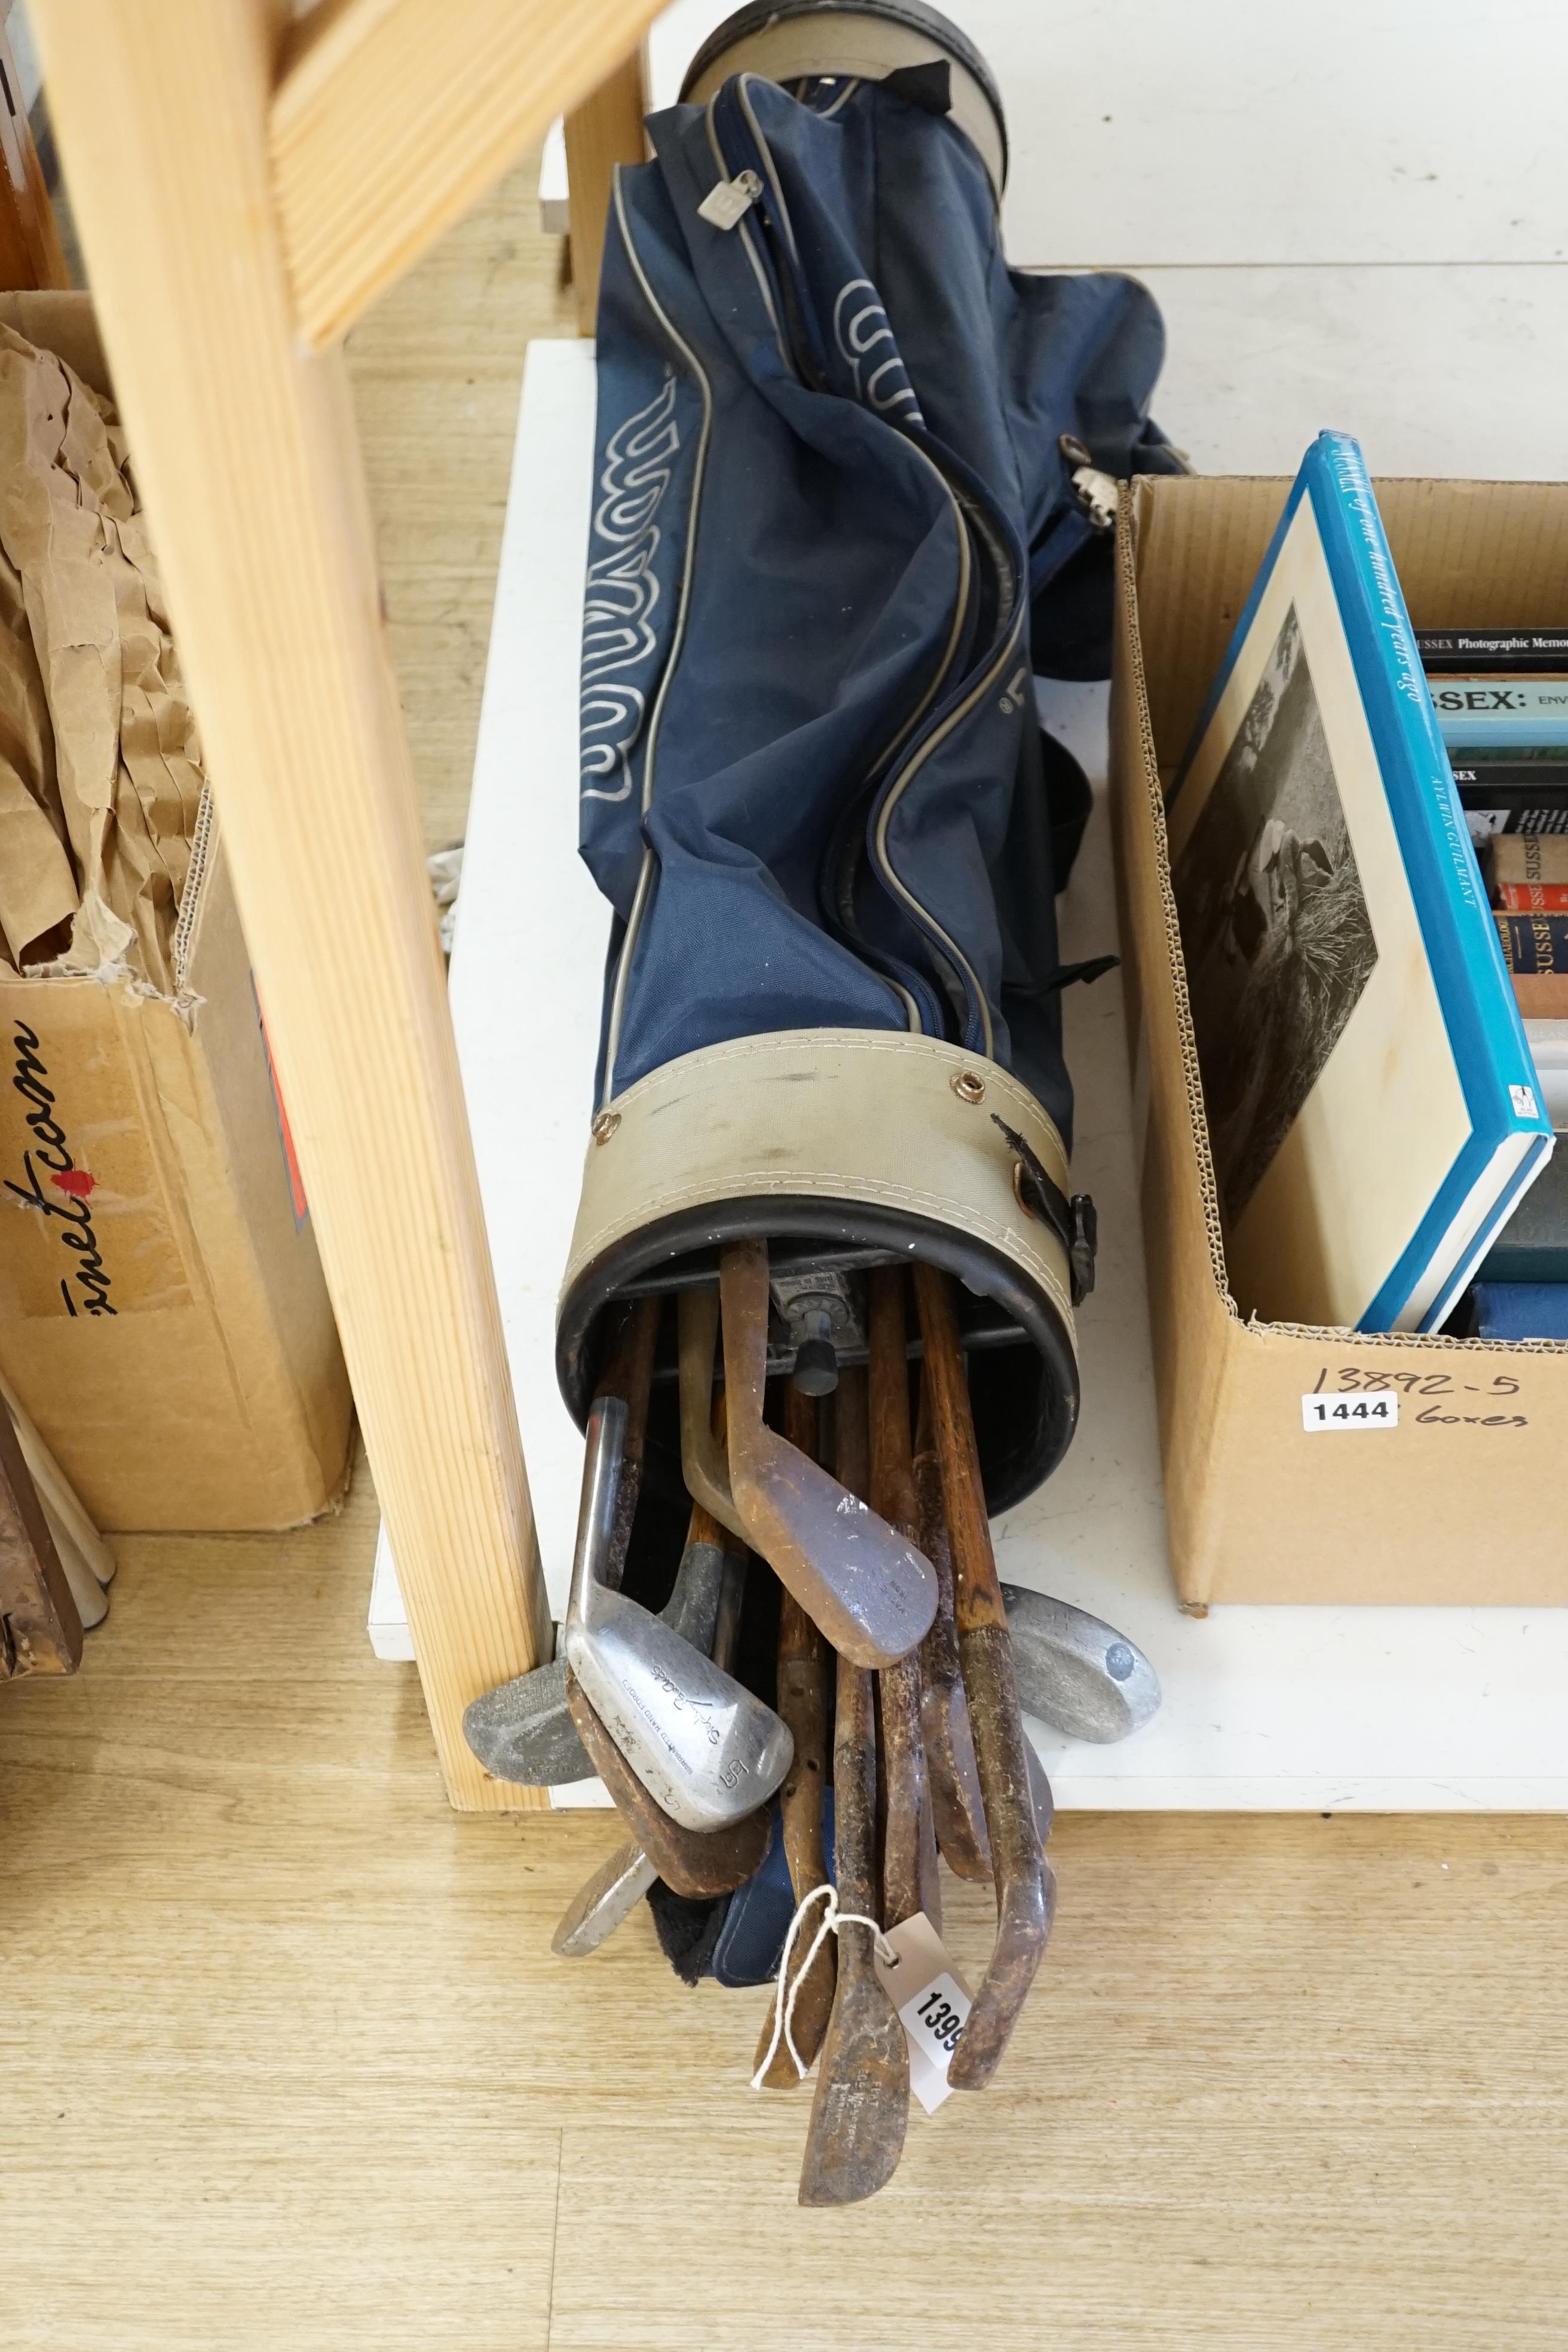 A collection of golf clubs, largely hickory shafted with two cases. Condition - varies